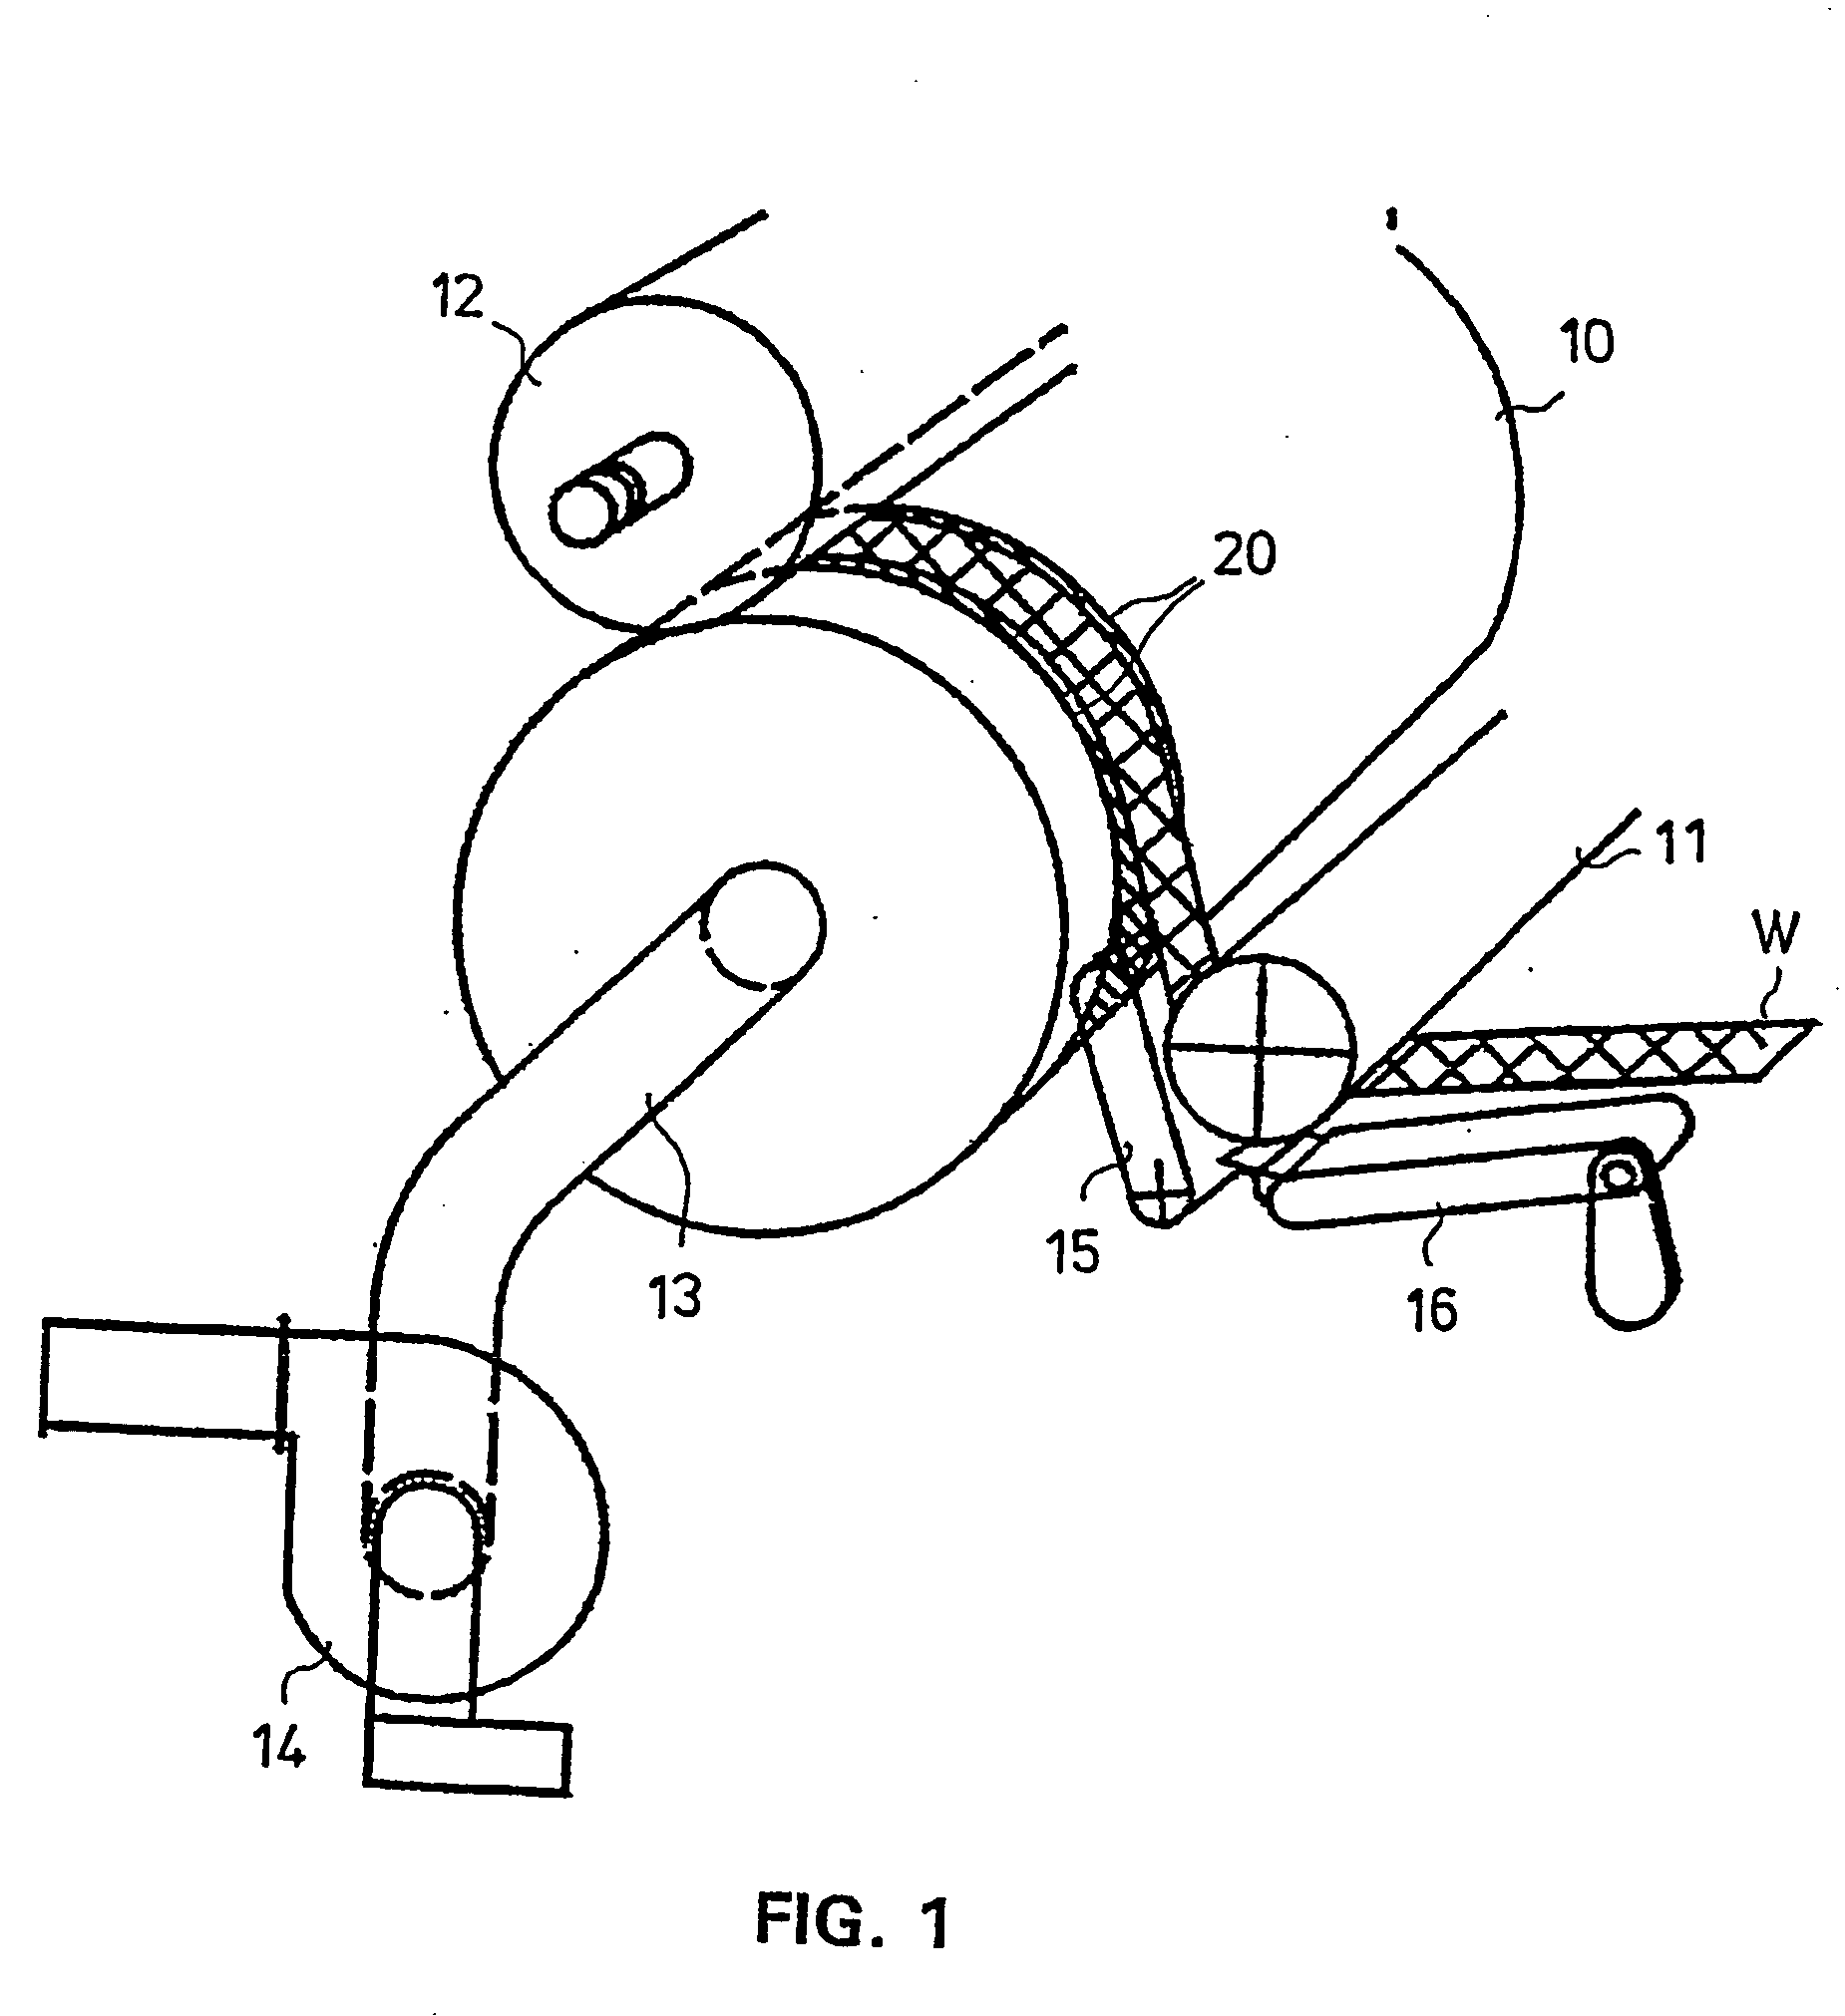 Method and device for threading a web in the reeling of a paper or board web